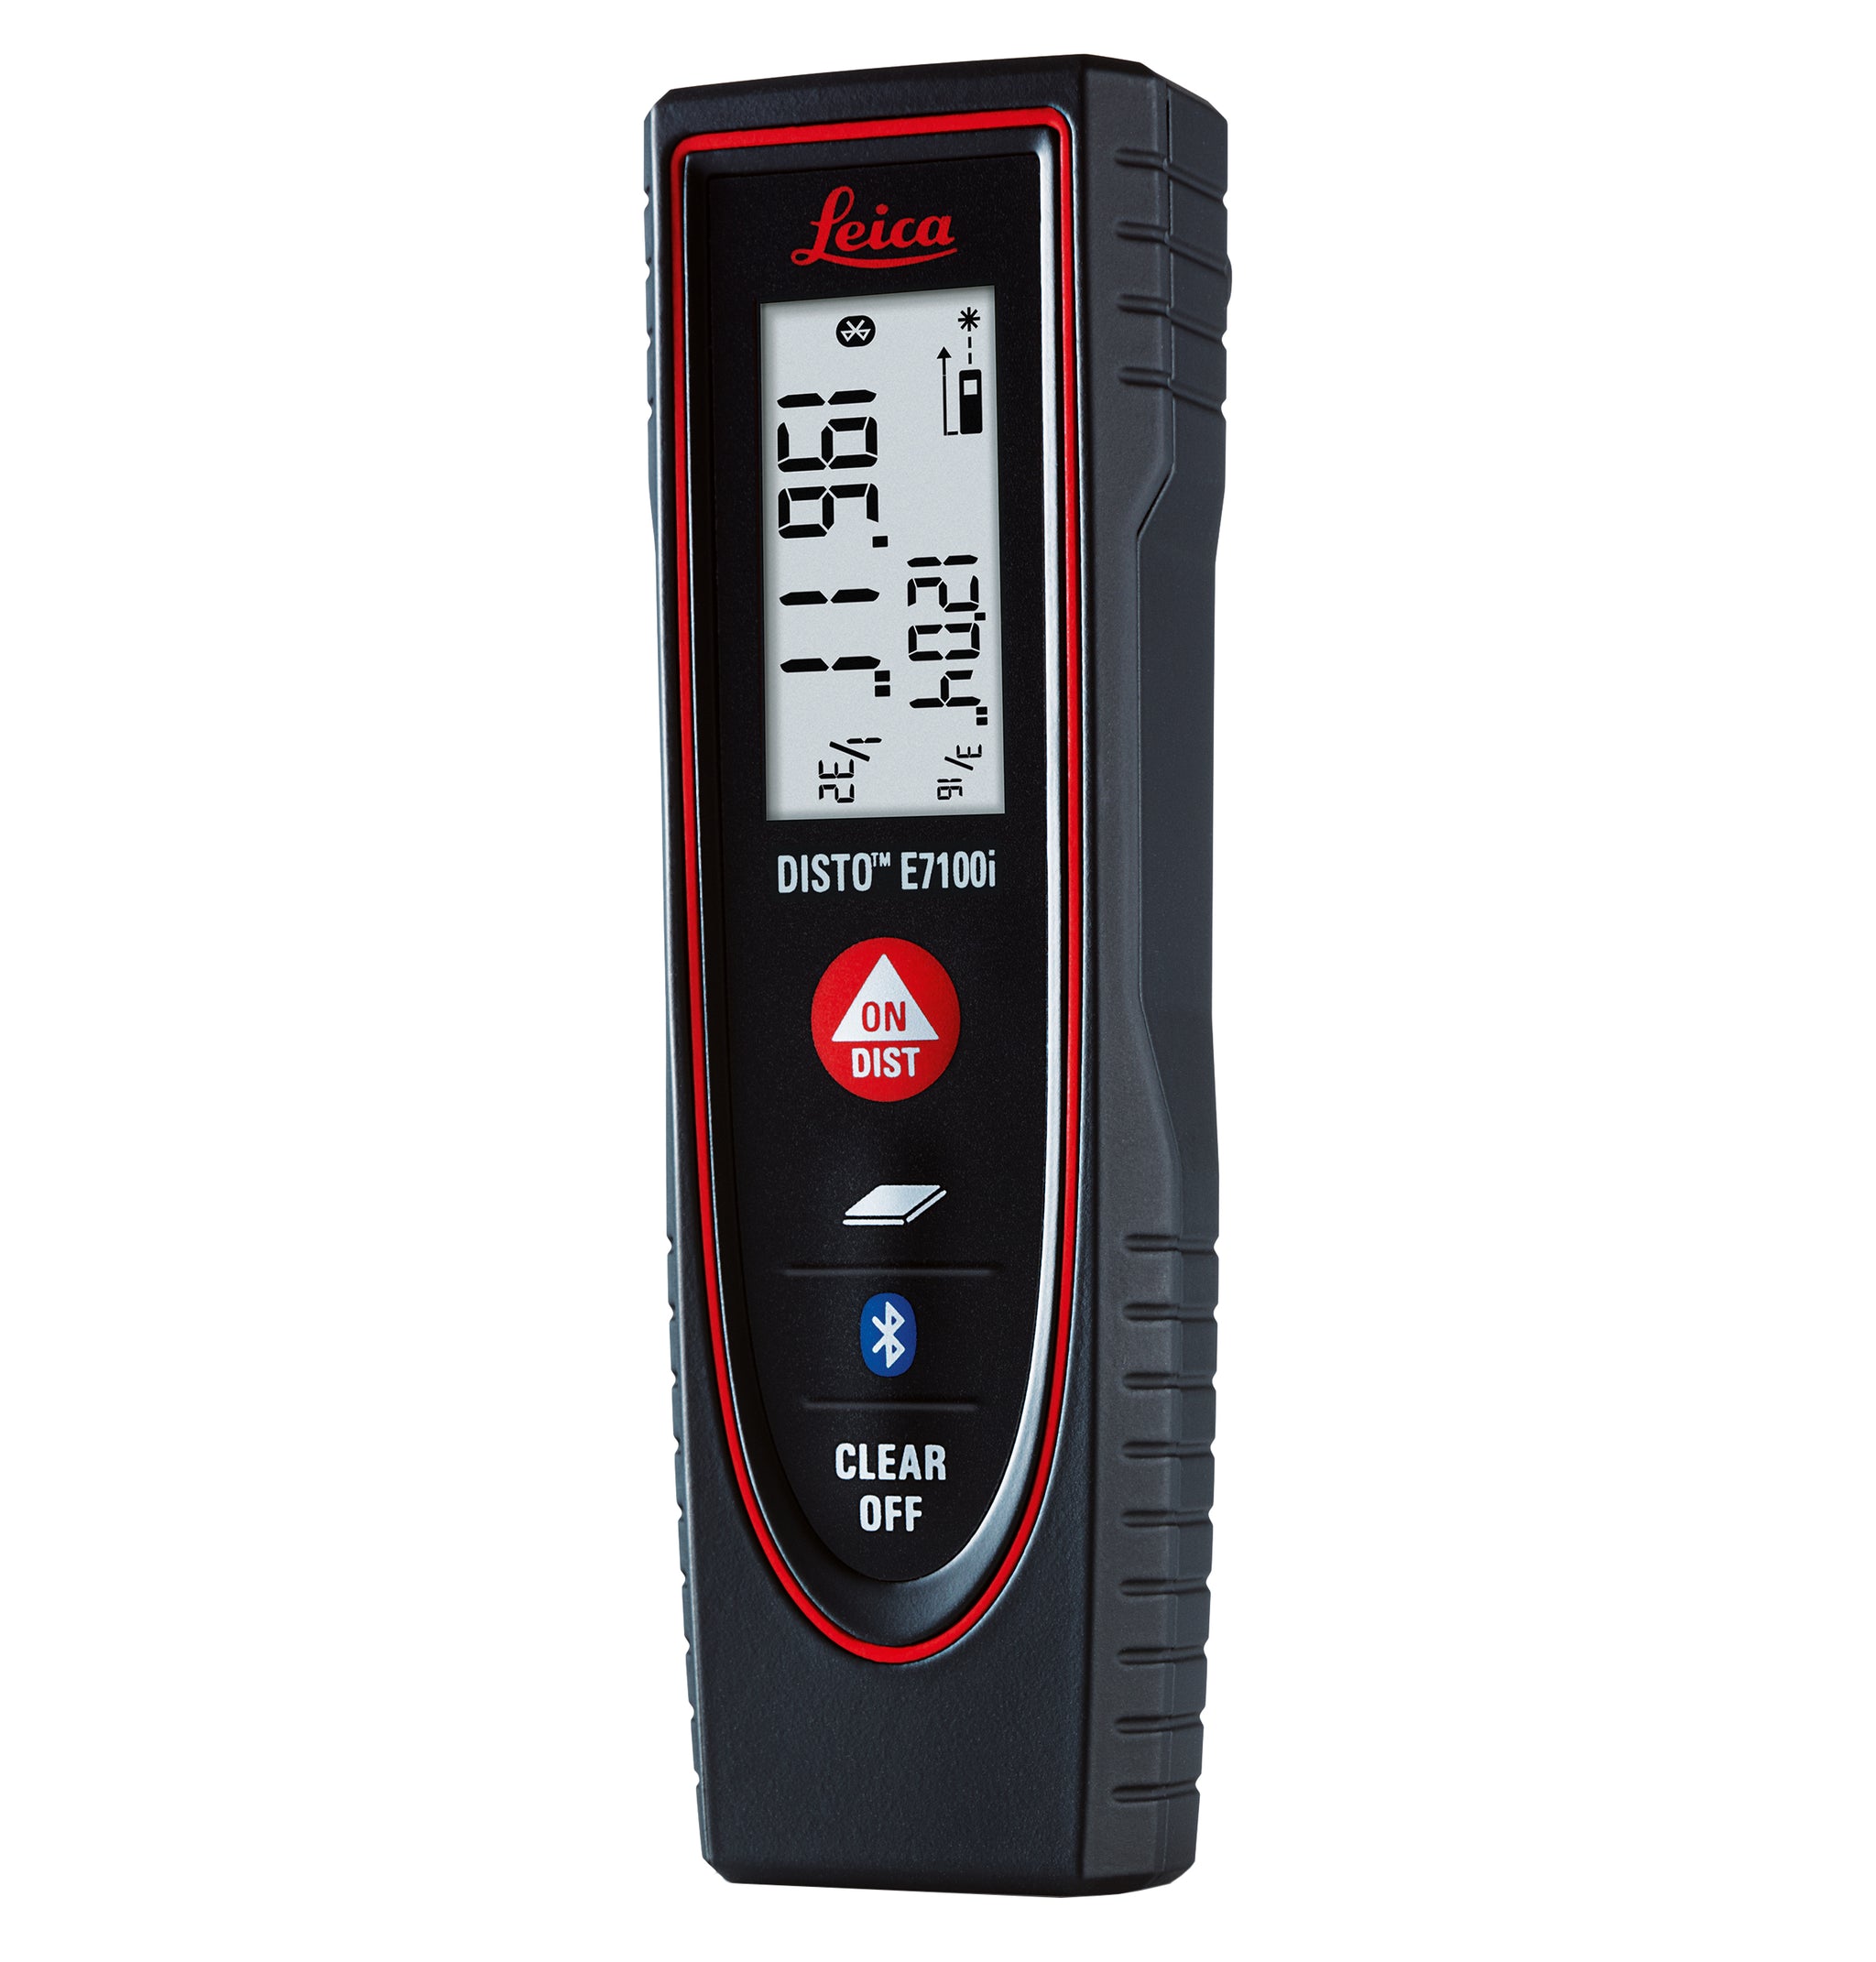 Leica Disto E7100i Laser Distance Meter Bluetooth and Area Function